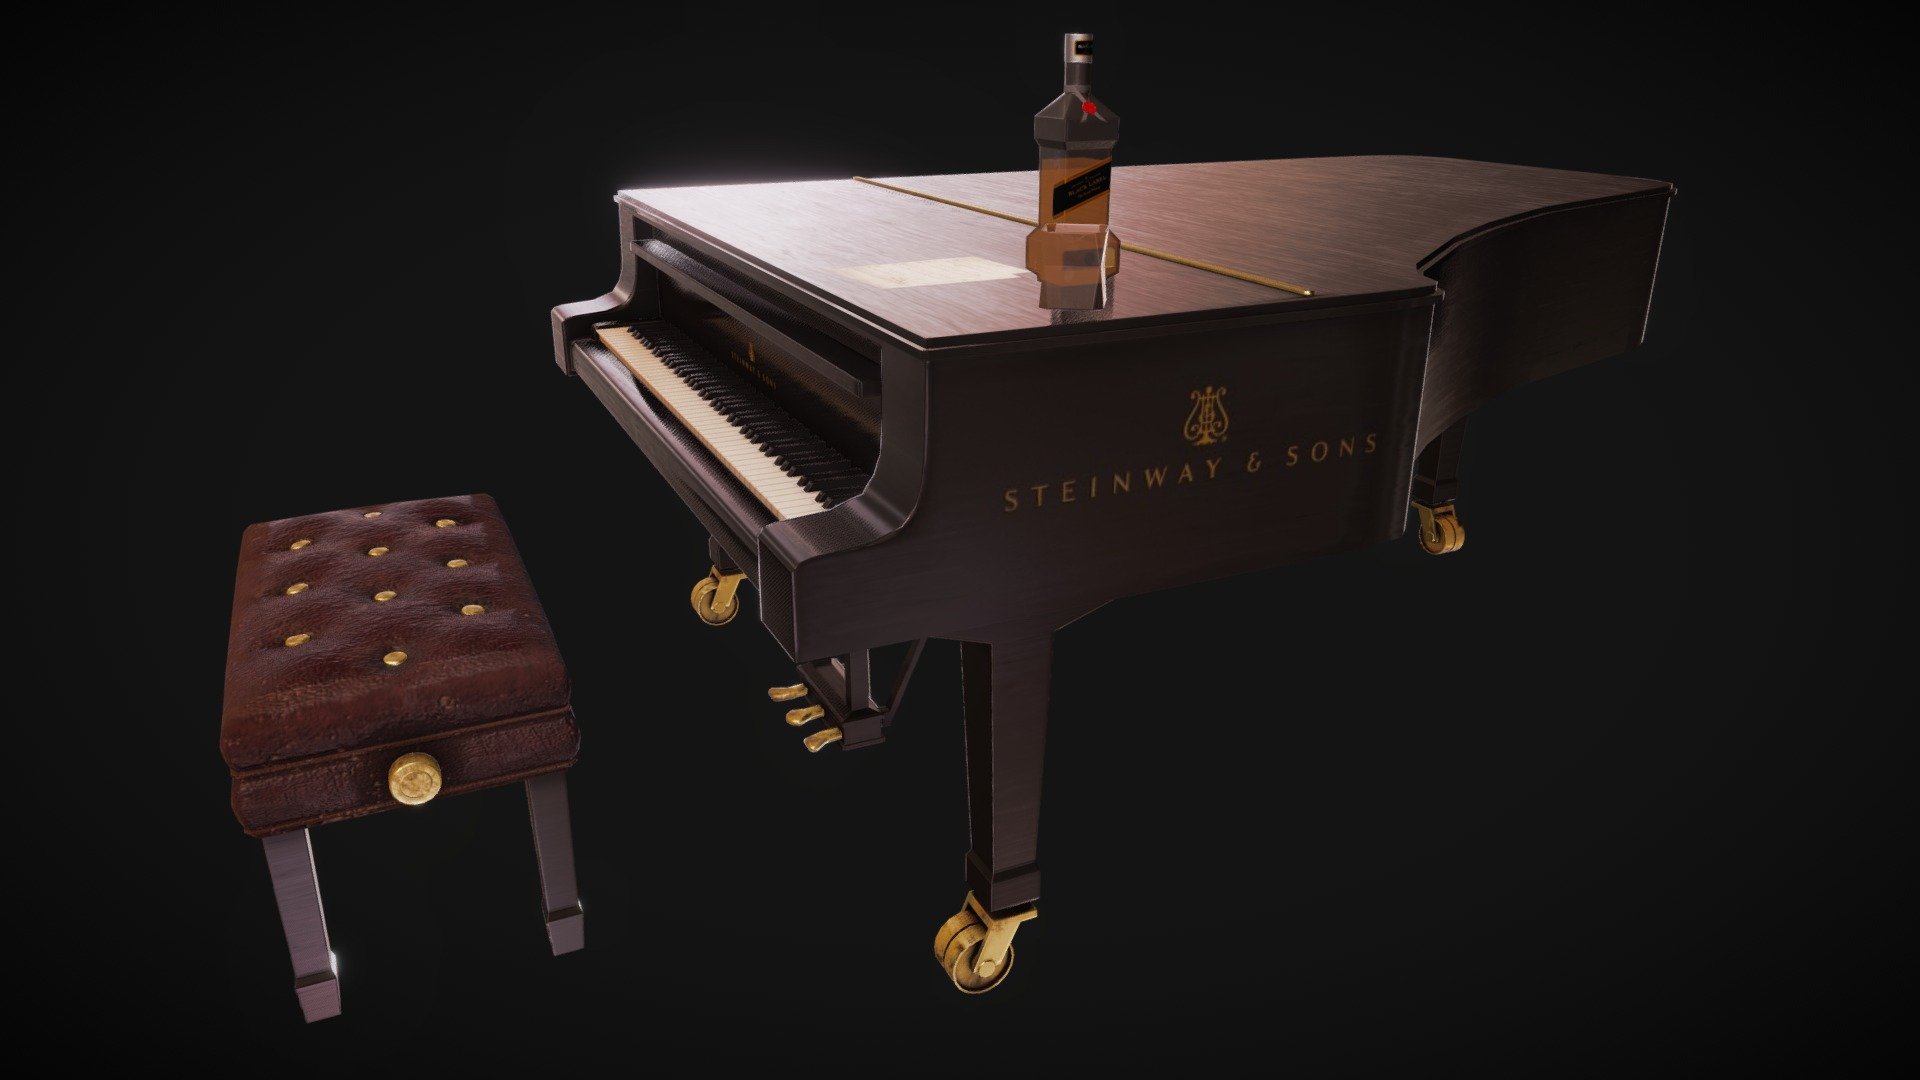 This Grand Piano was made using 3Ds Max and Substance Painter. This small scene was done as an experiment as I do not often do any baking from high poly to low poly. The whiskey bottle and glass were inspired by the film Blade Runner 3d model